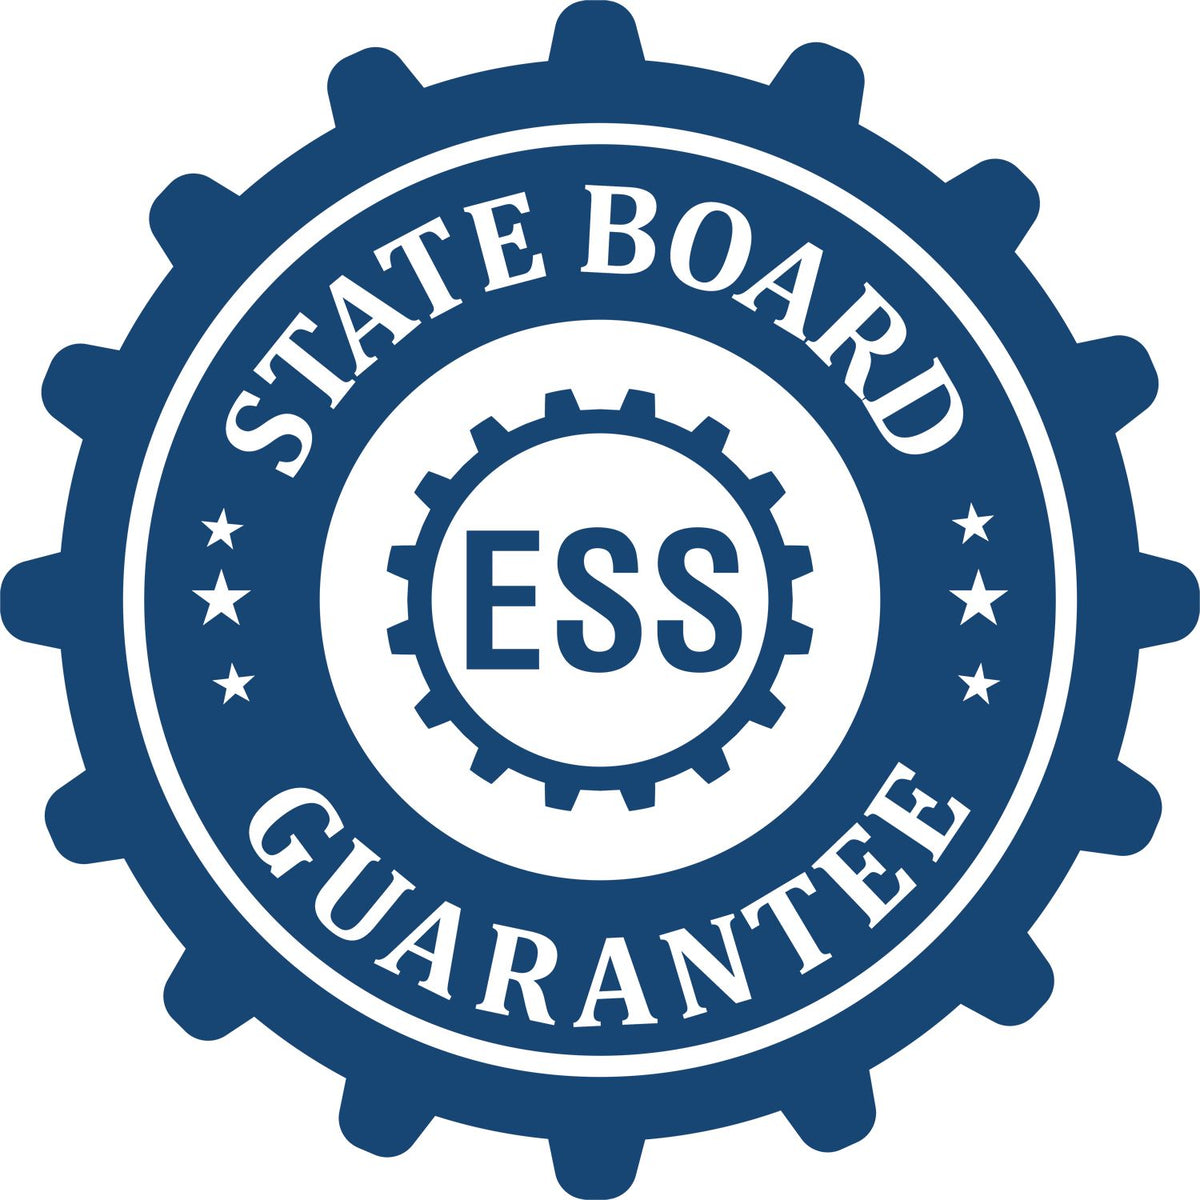 An emblem in a gear shape illustrating a state board guarantee for the Montana Landscape Architectural Seal Stamp product.